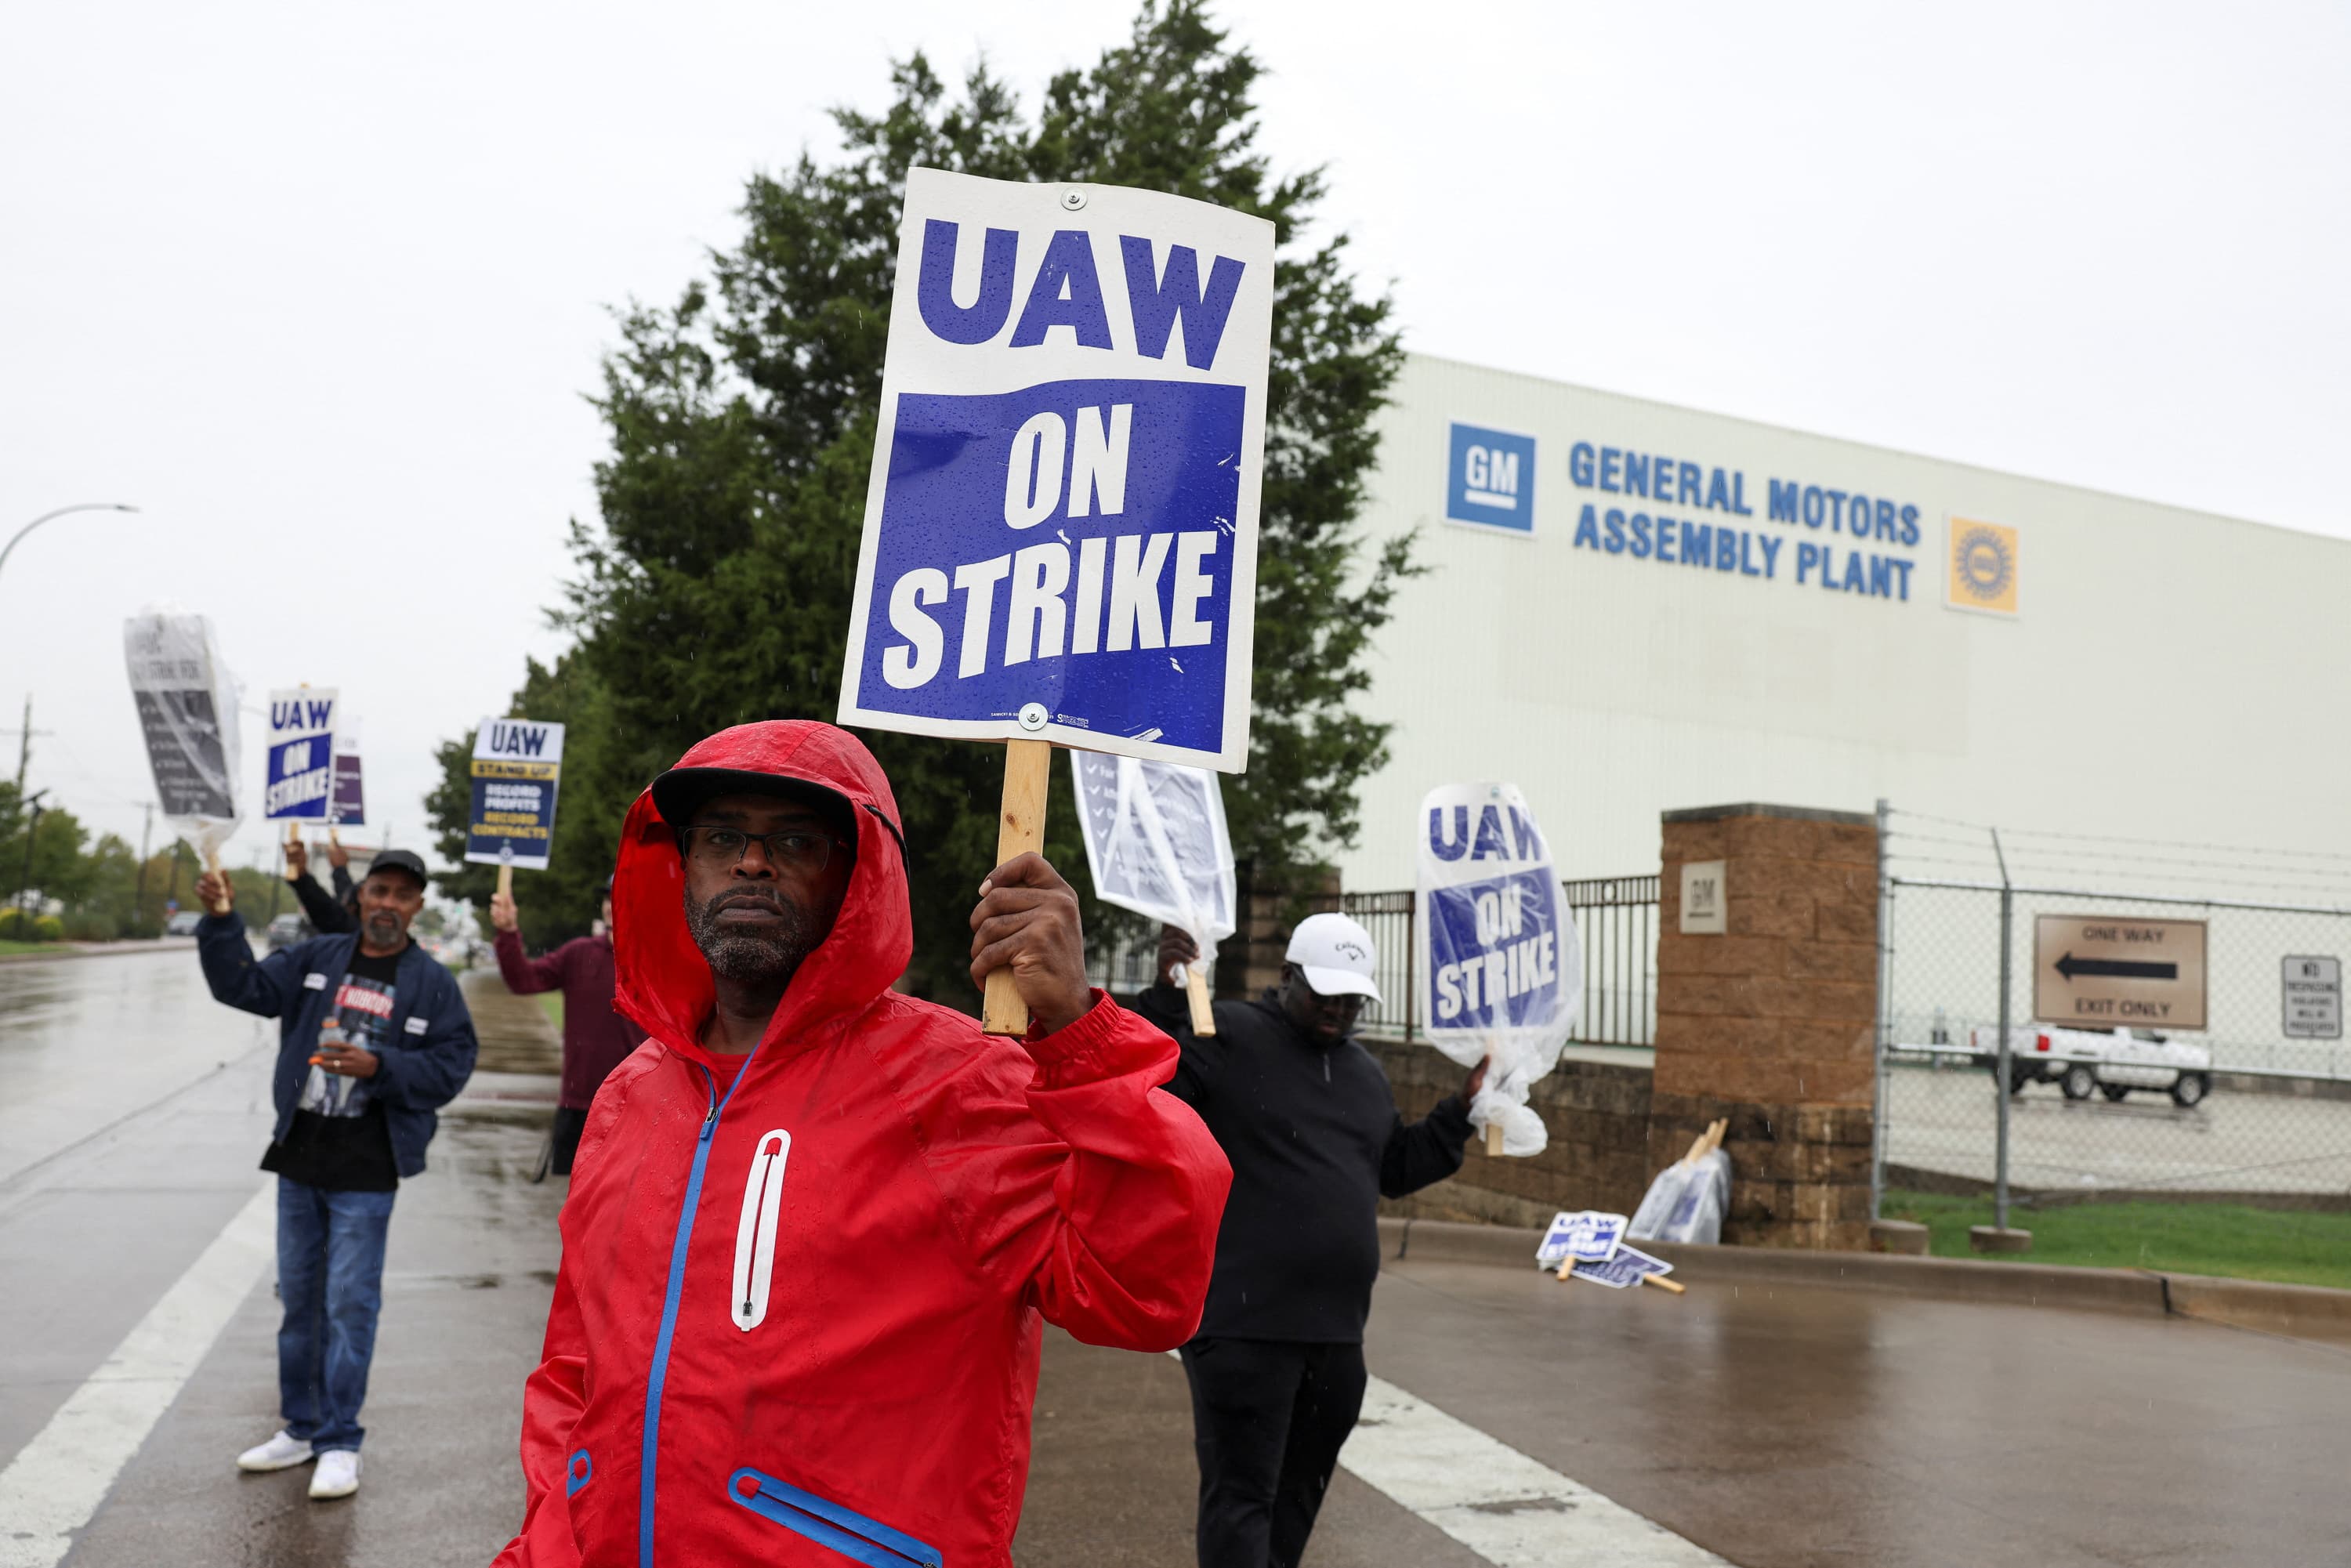 GM-UAW deal is in jeopardy as vote comes down to the wire